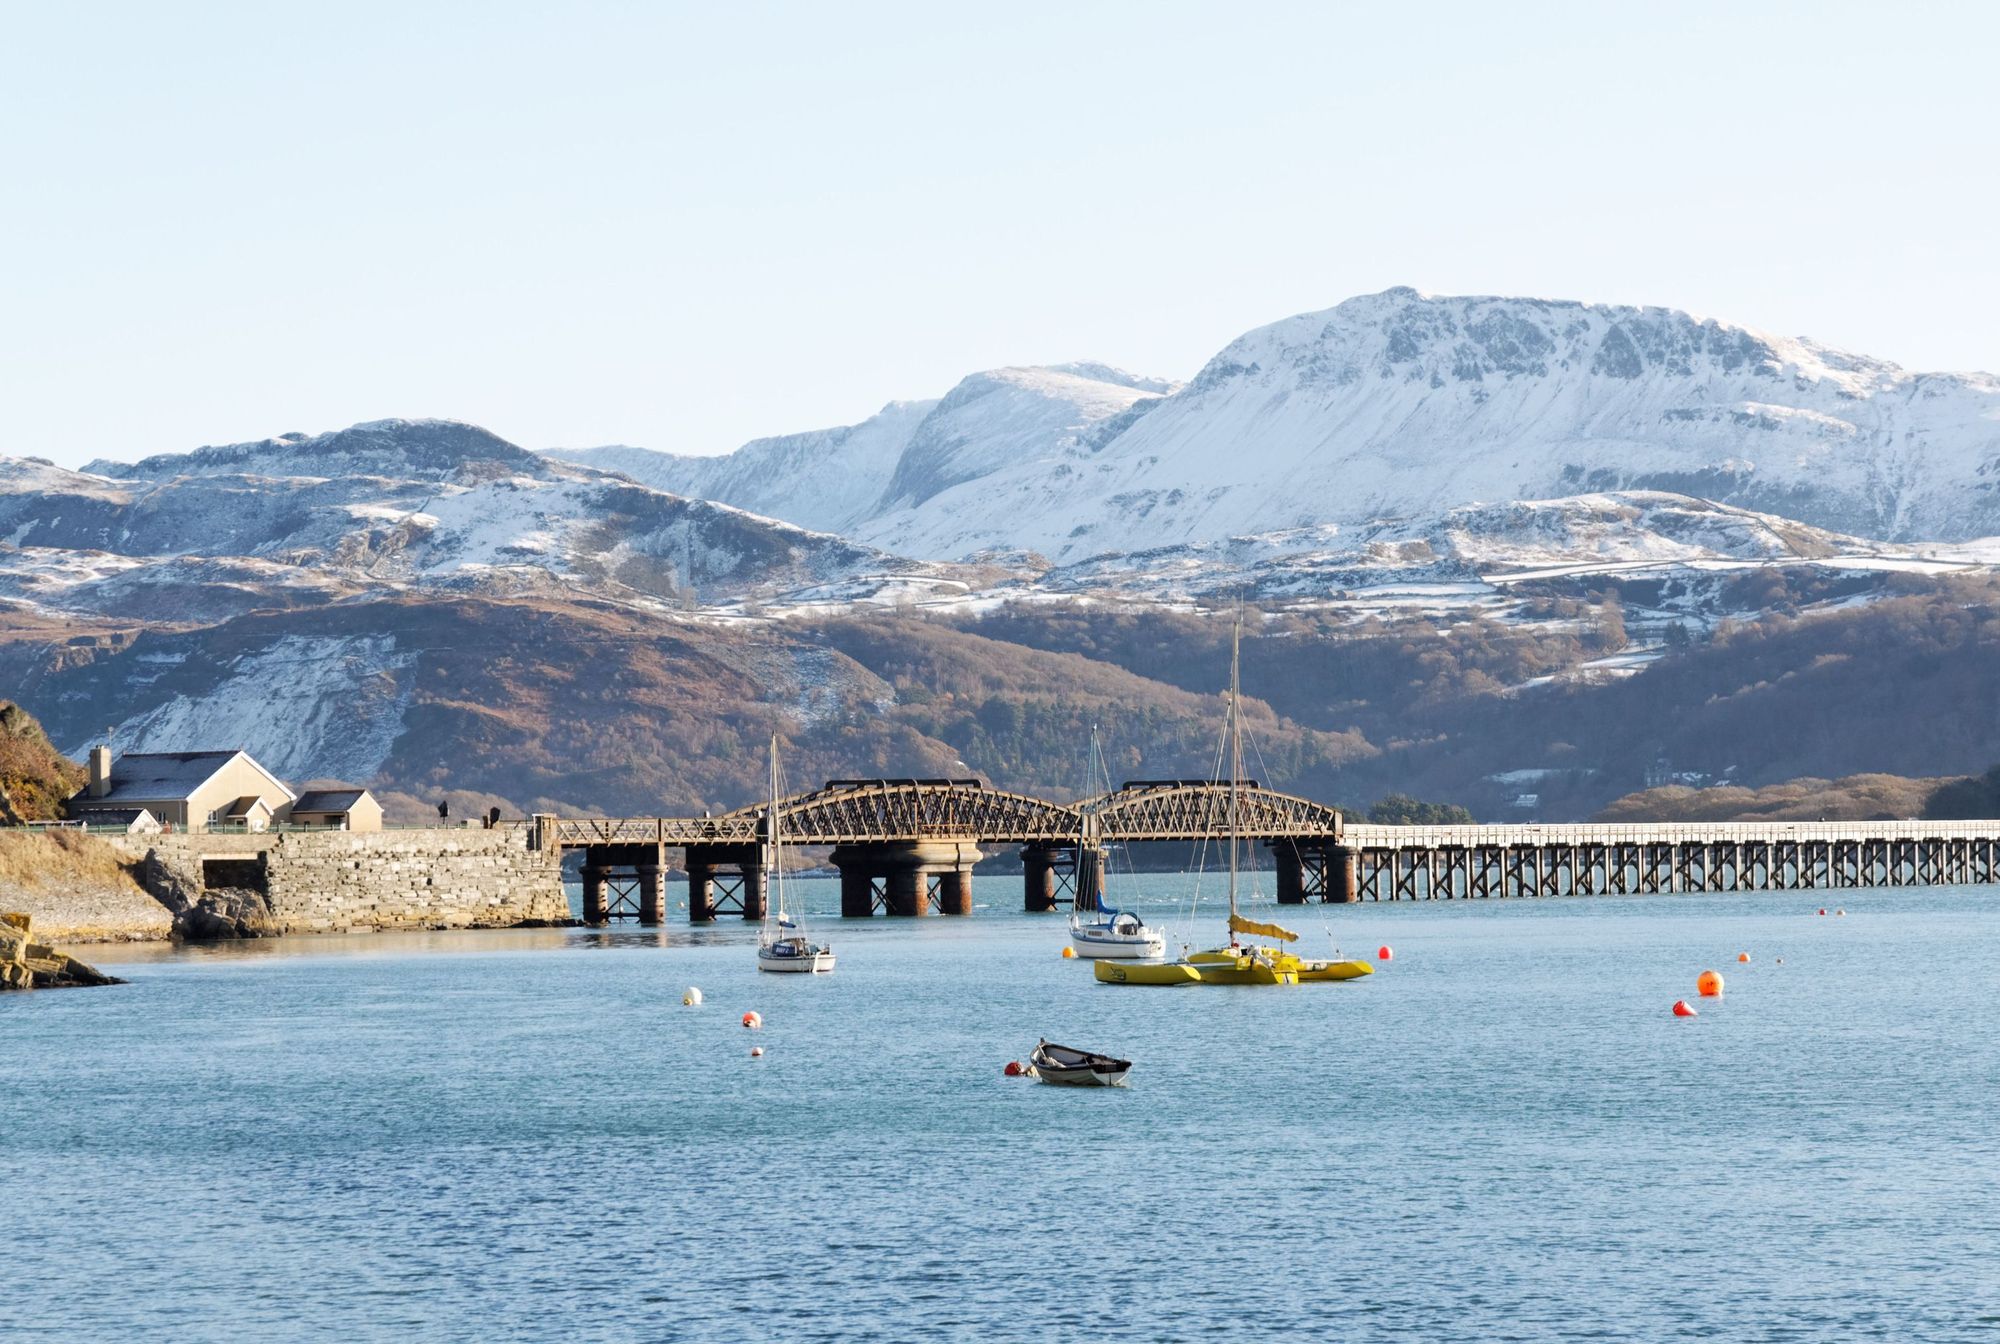 A view of the railway spanning the Mawddach Estuary taken from Barmouth Harbour, with the snow-covered Cader Idris in the background. Photo: Getty